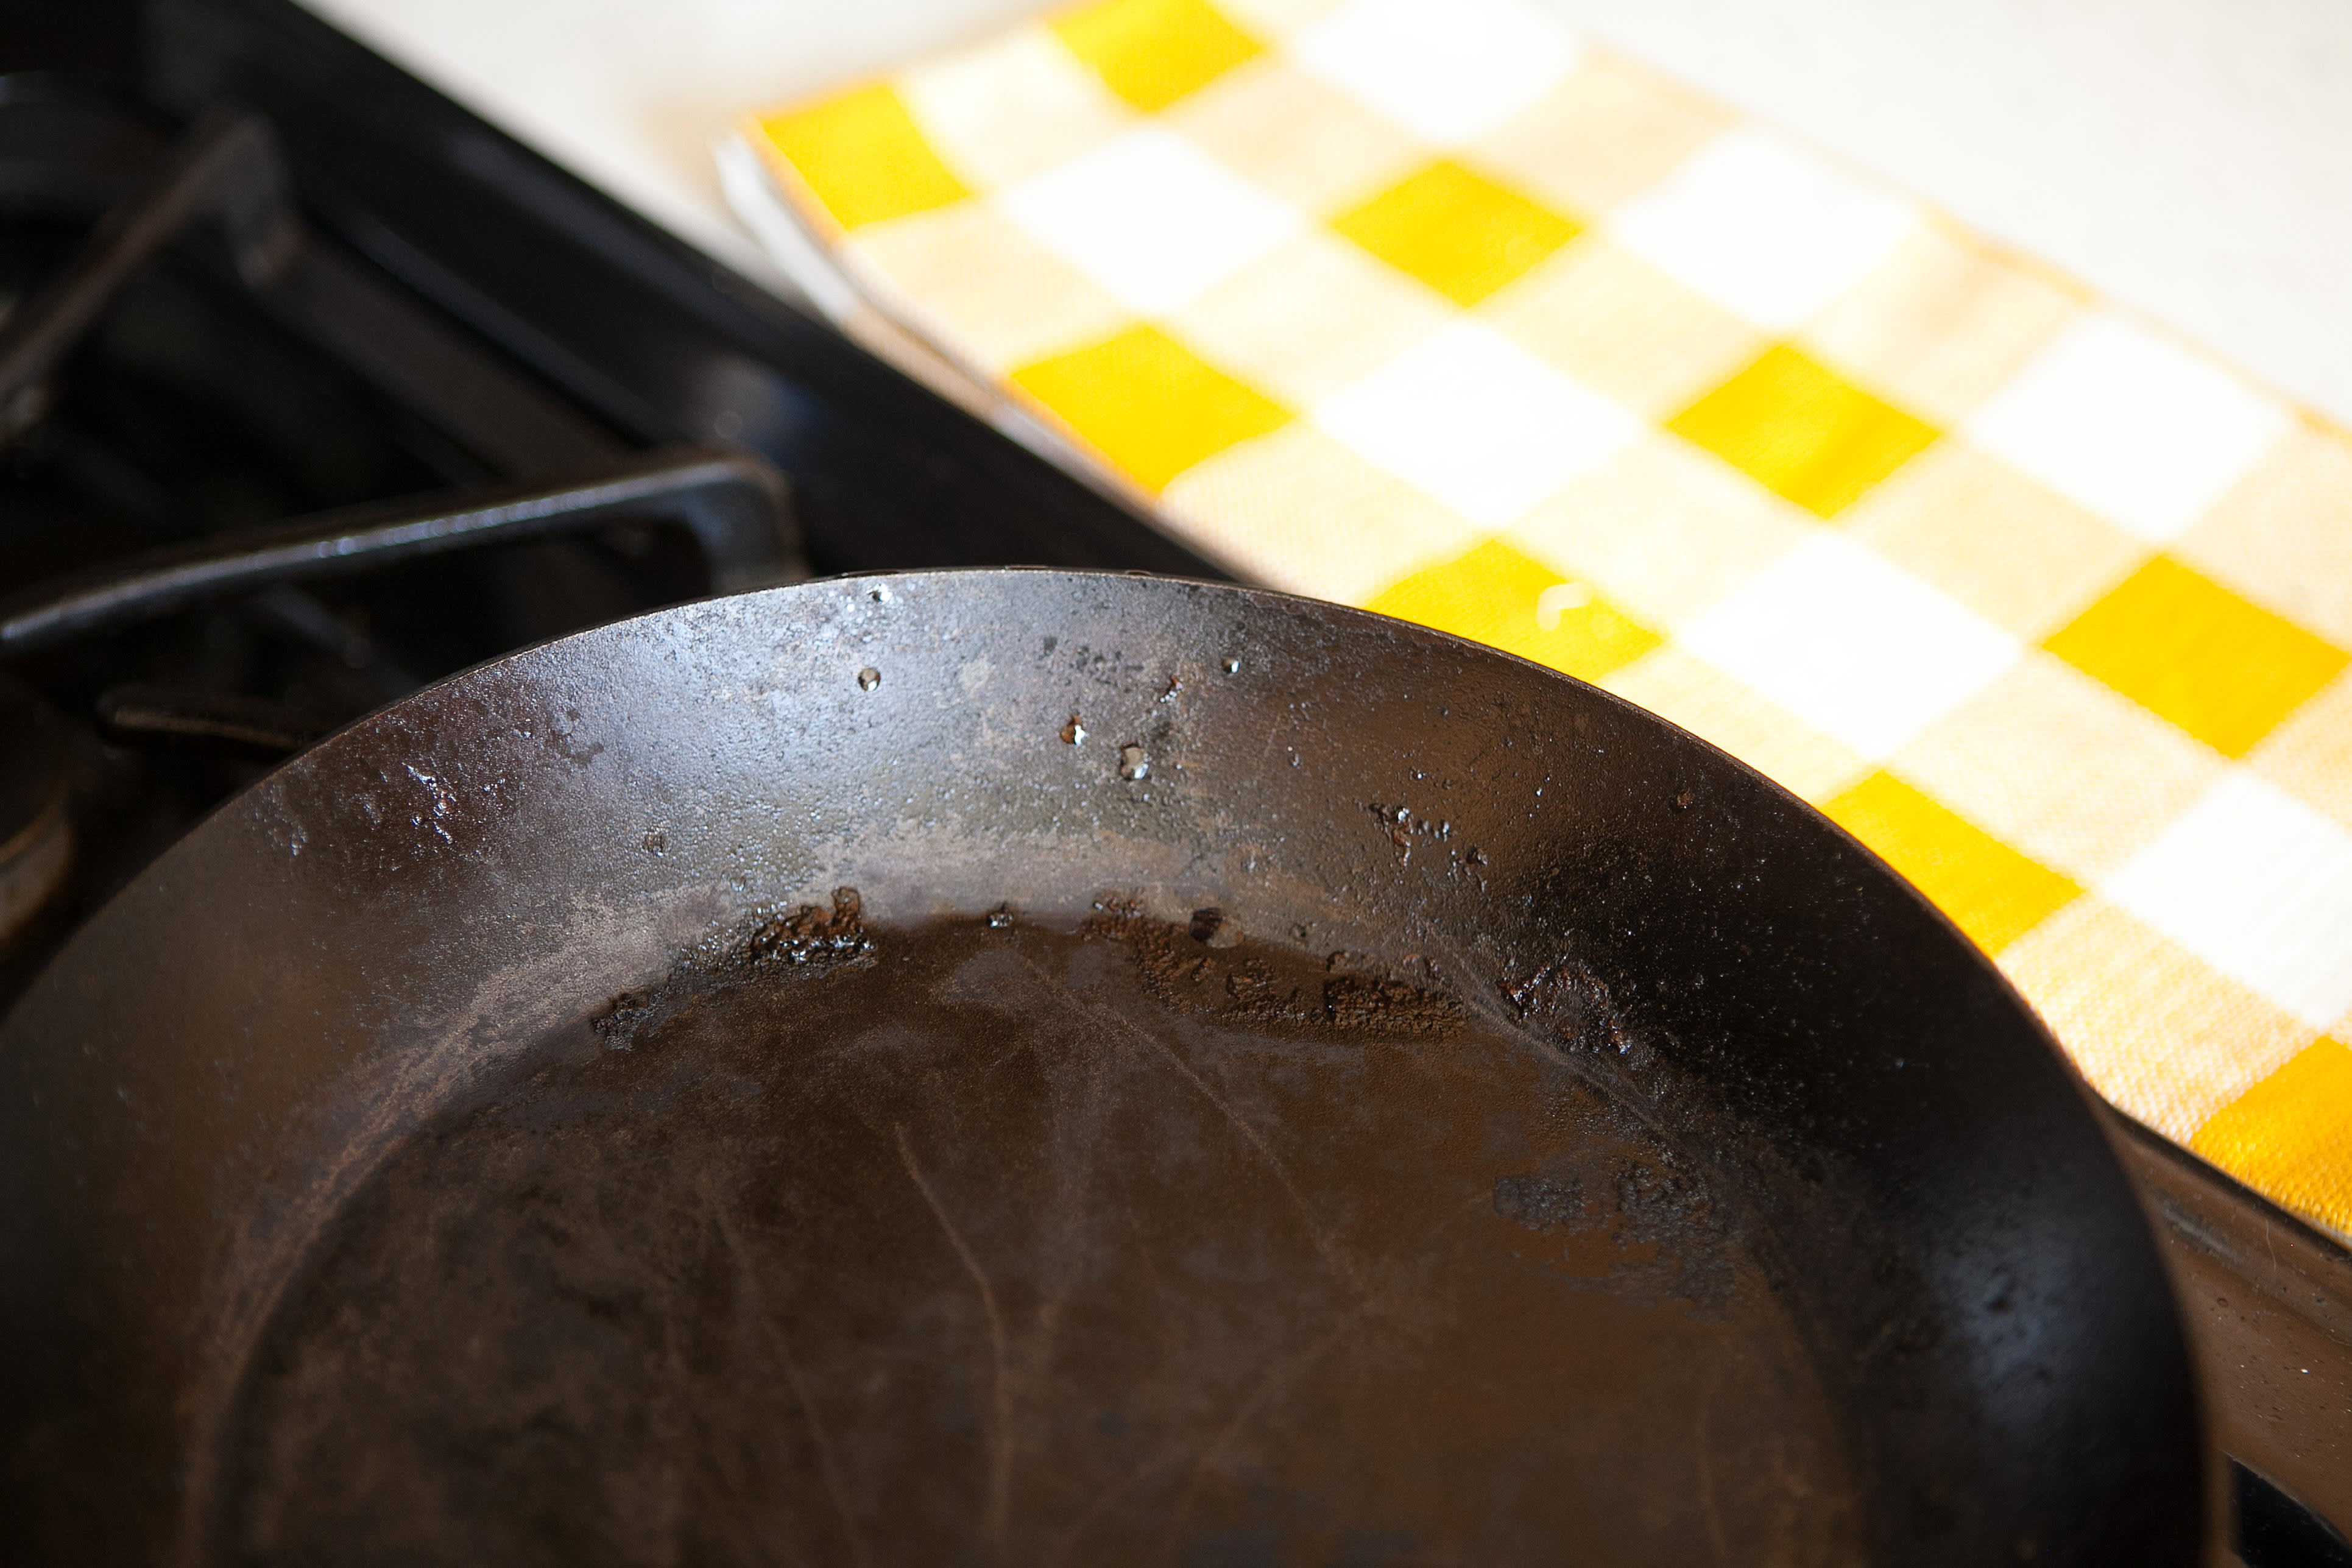 How To Season, Clean And Care For A Carbon Steel Pan - Forbes Vetted